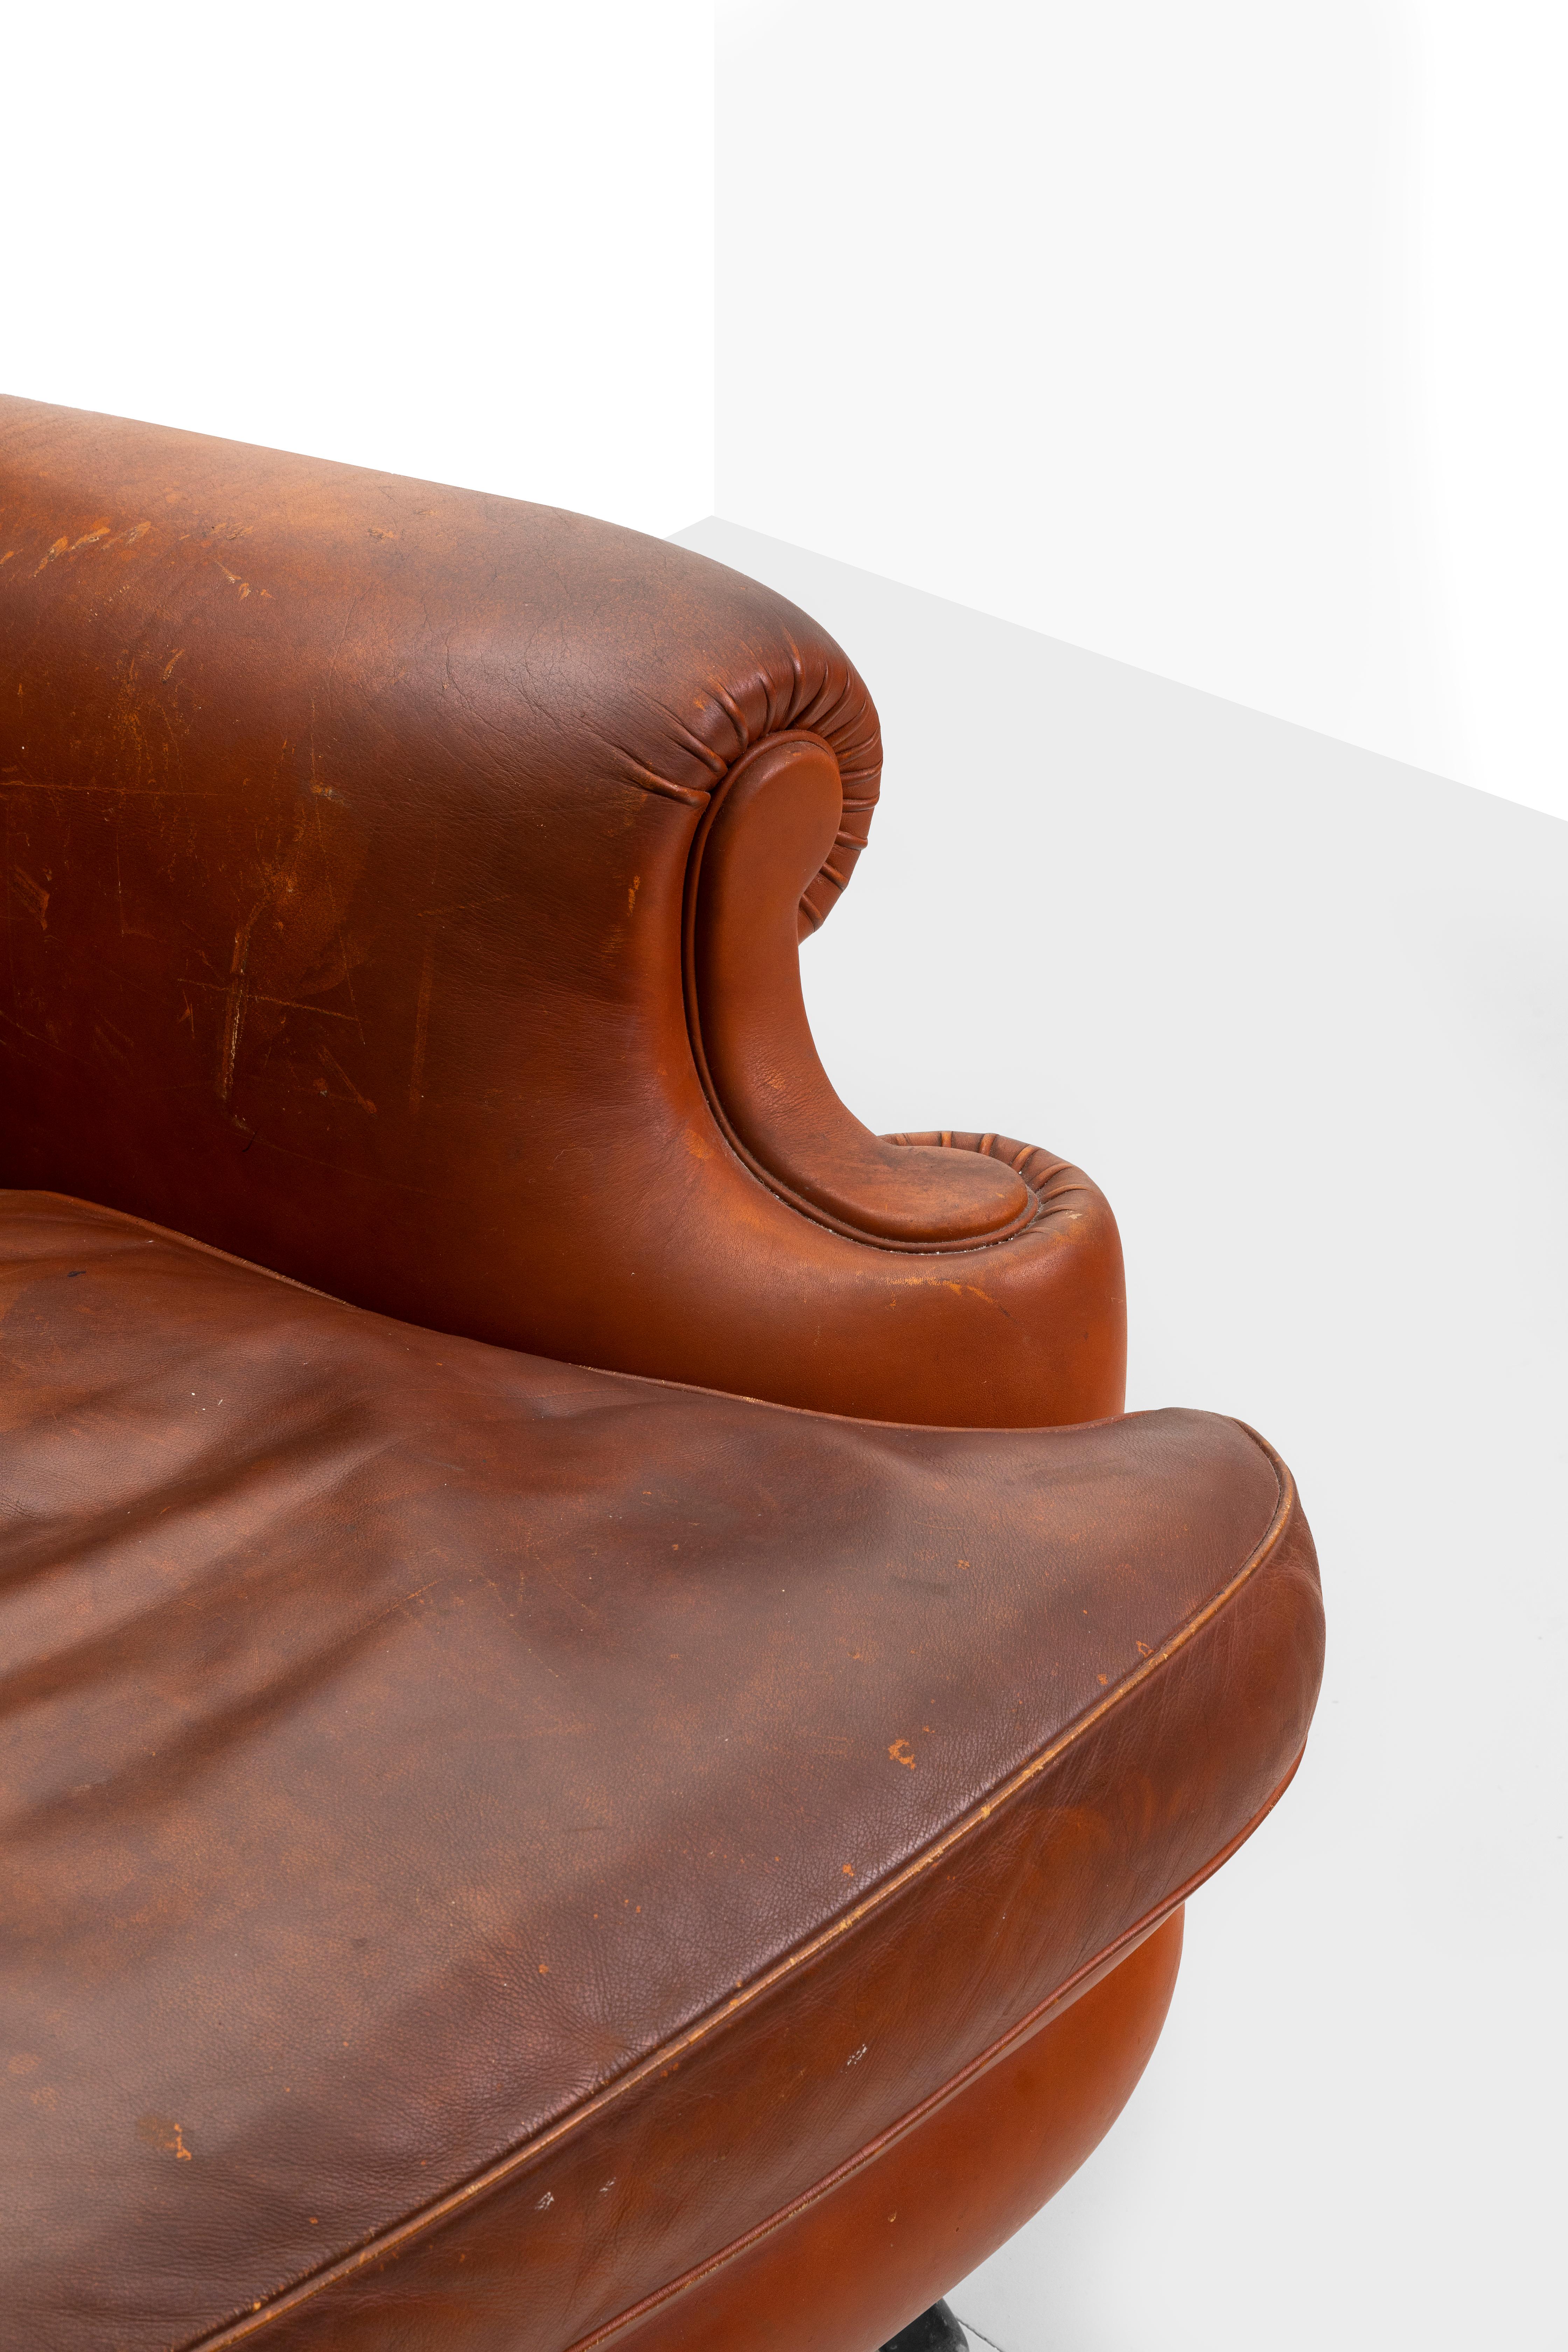 An icon-object and true symbol of Poltrona Frau, which programmatically declares it in its name, the armchair sums up all those characteristics of design and comfort that have always been associated with the Tolentino-based brand. Cosy and almost